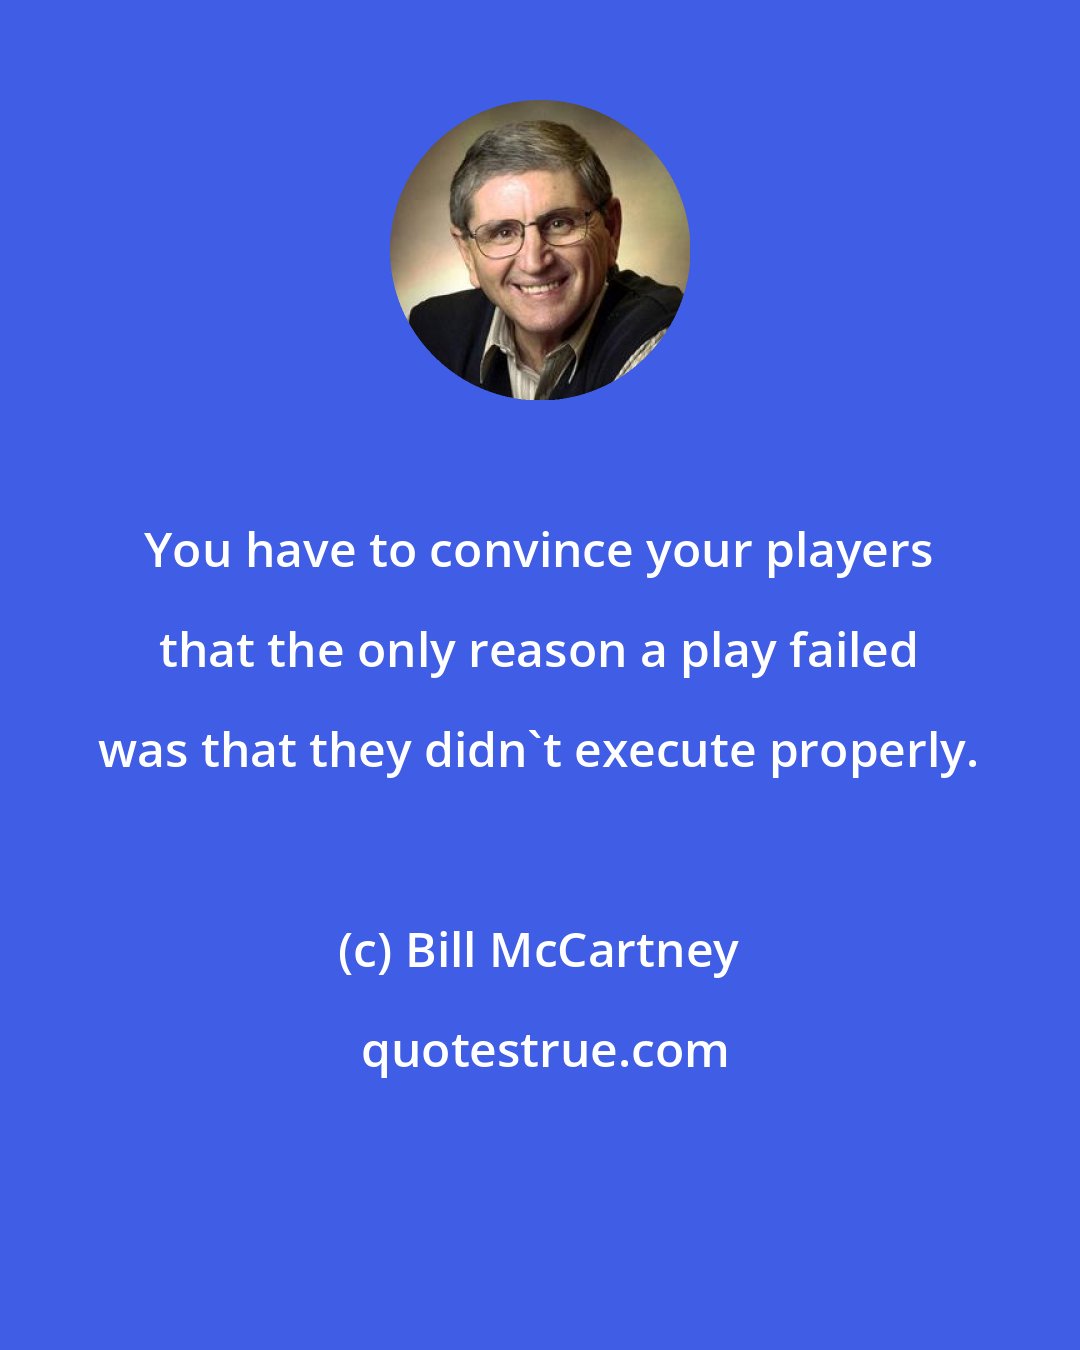 Bill McCartney: You have to convince your players that the only reason a play failed was that they didn't execute properly.